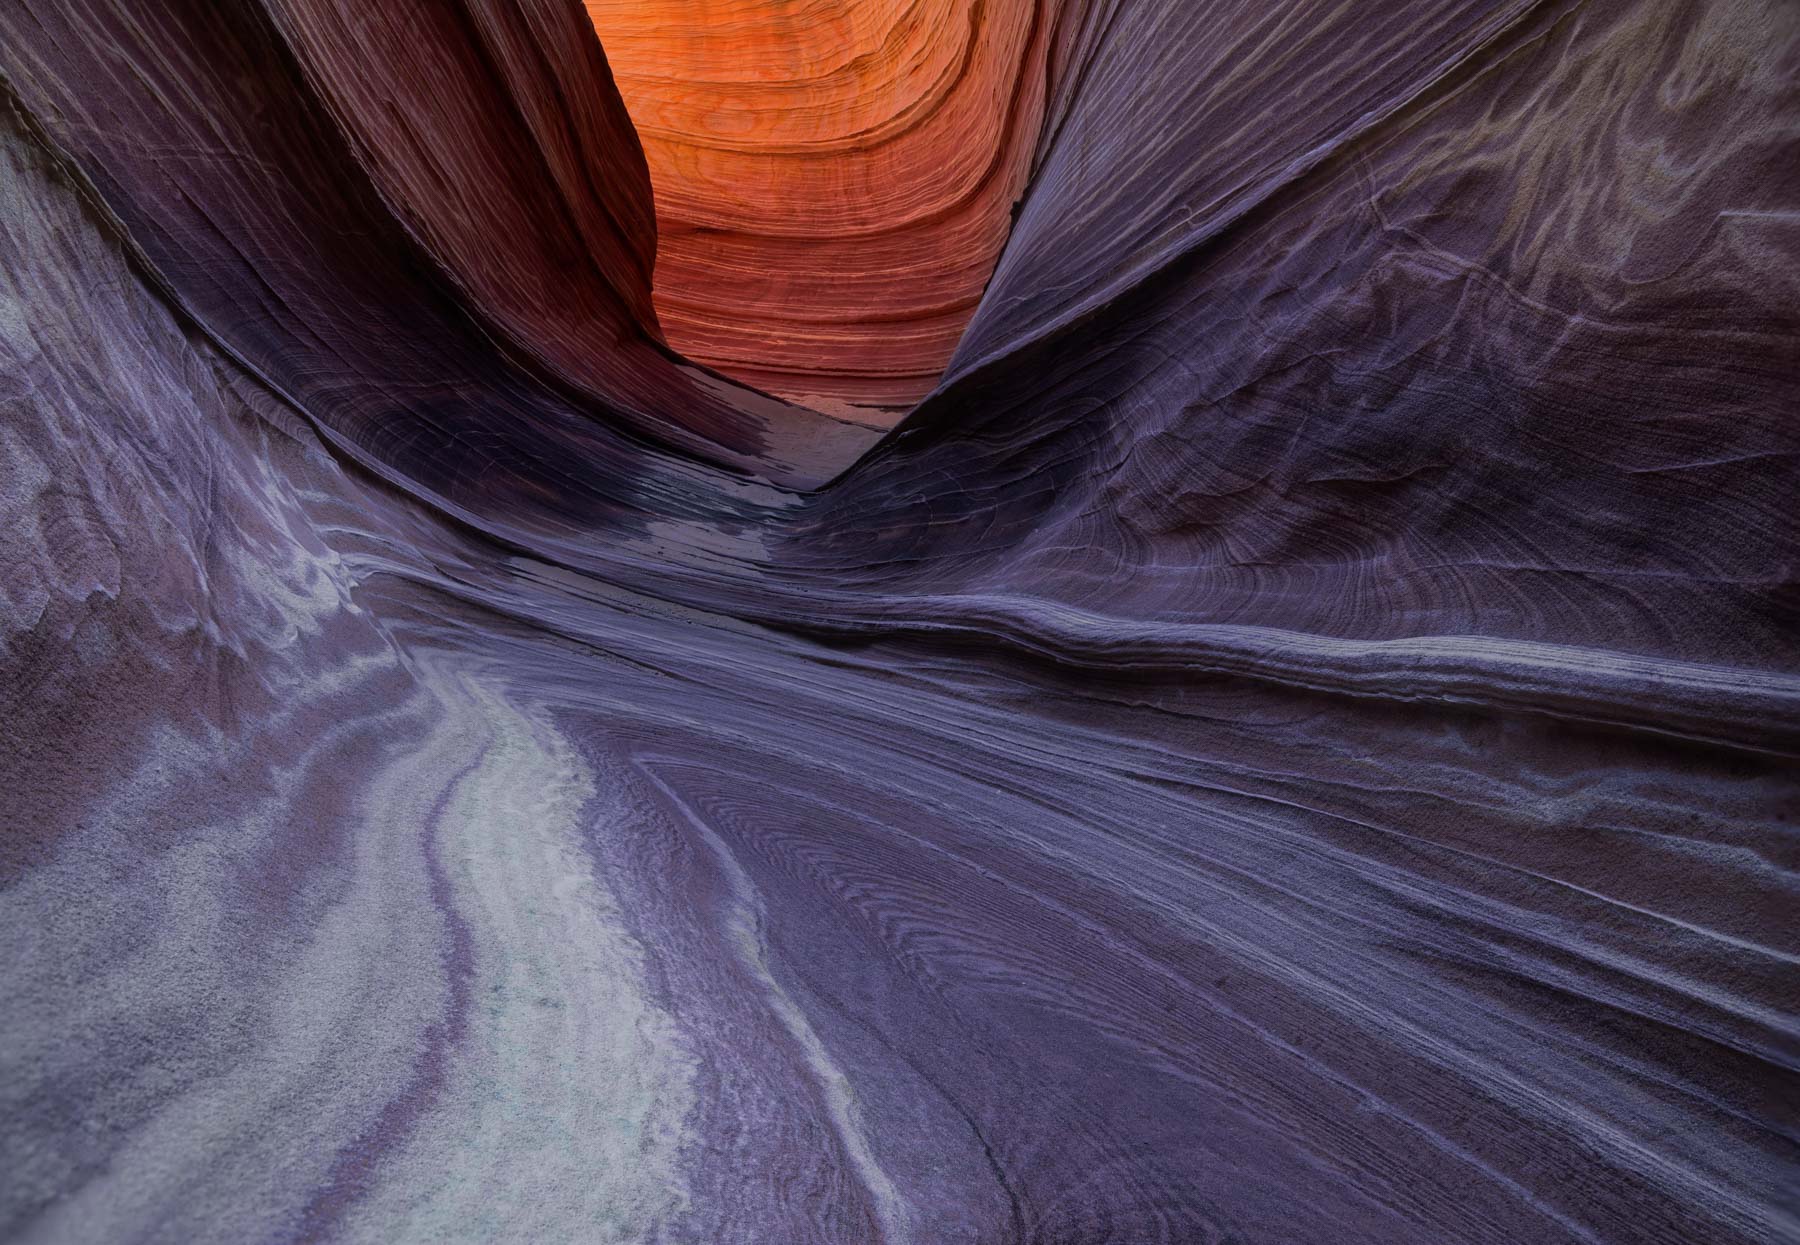 Short slot canyon at The Wave in Coyote Buttes North, Arizona